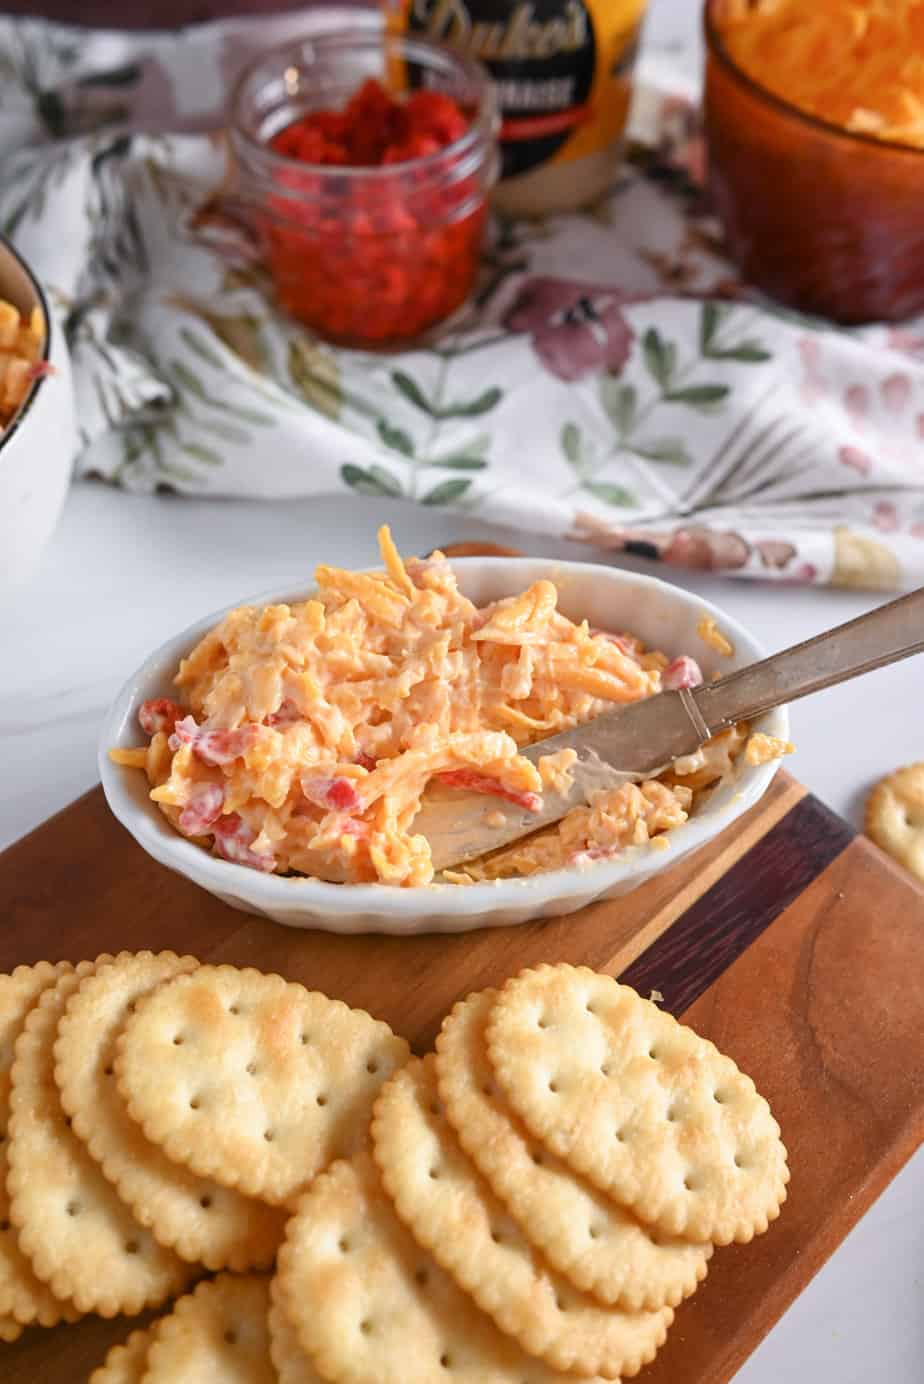 Butter knife in a small white dish filled with pimento cheese set on a wooden board with crackers.